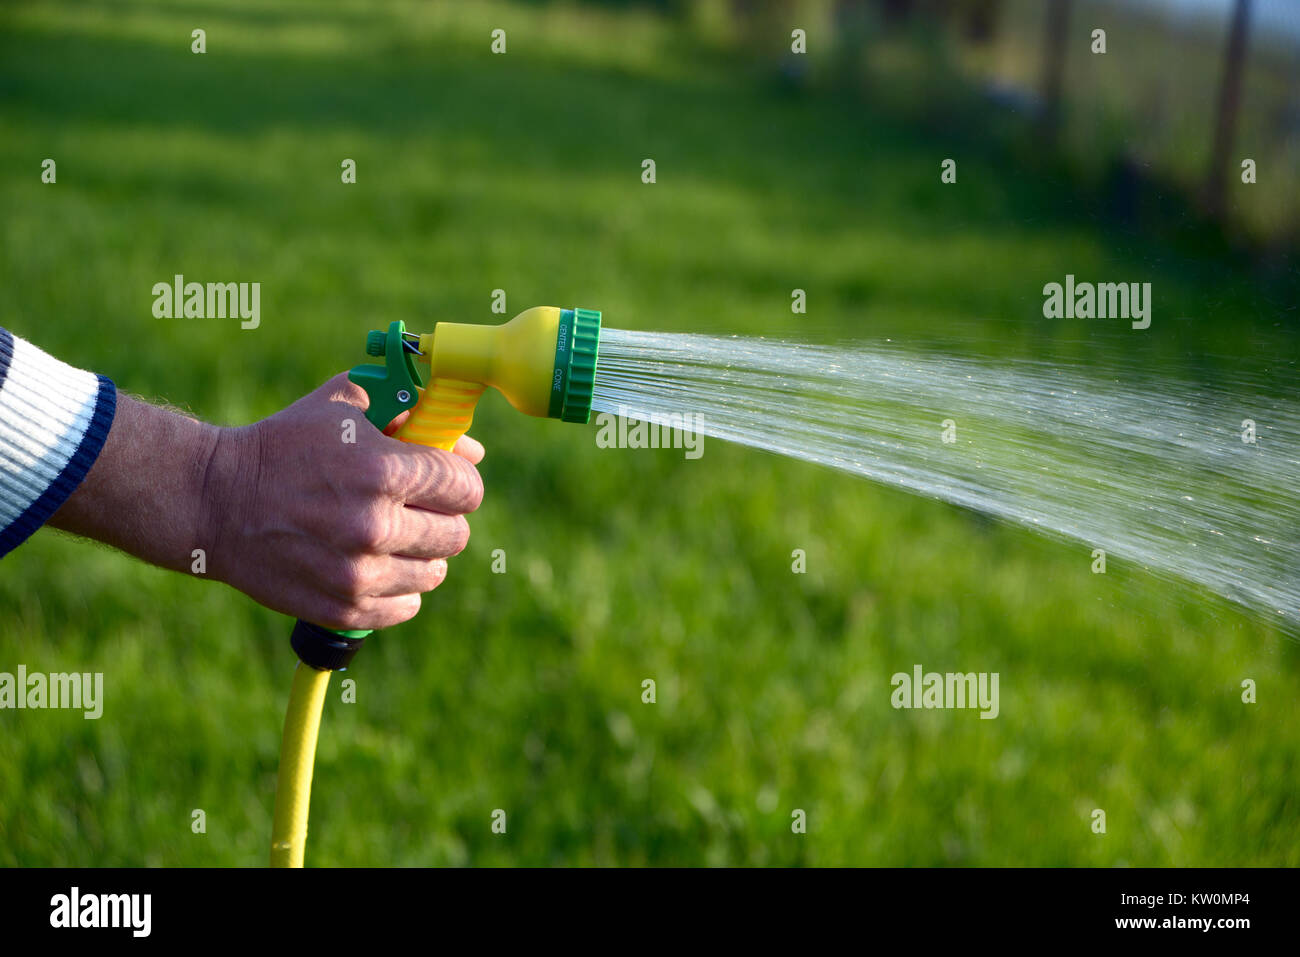 Hand holding a hose for watering with the sprayed stream Stock Photo